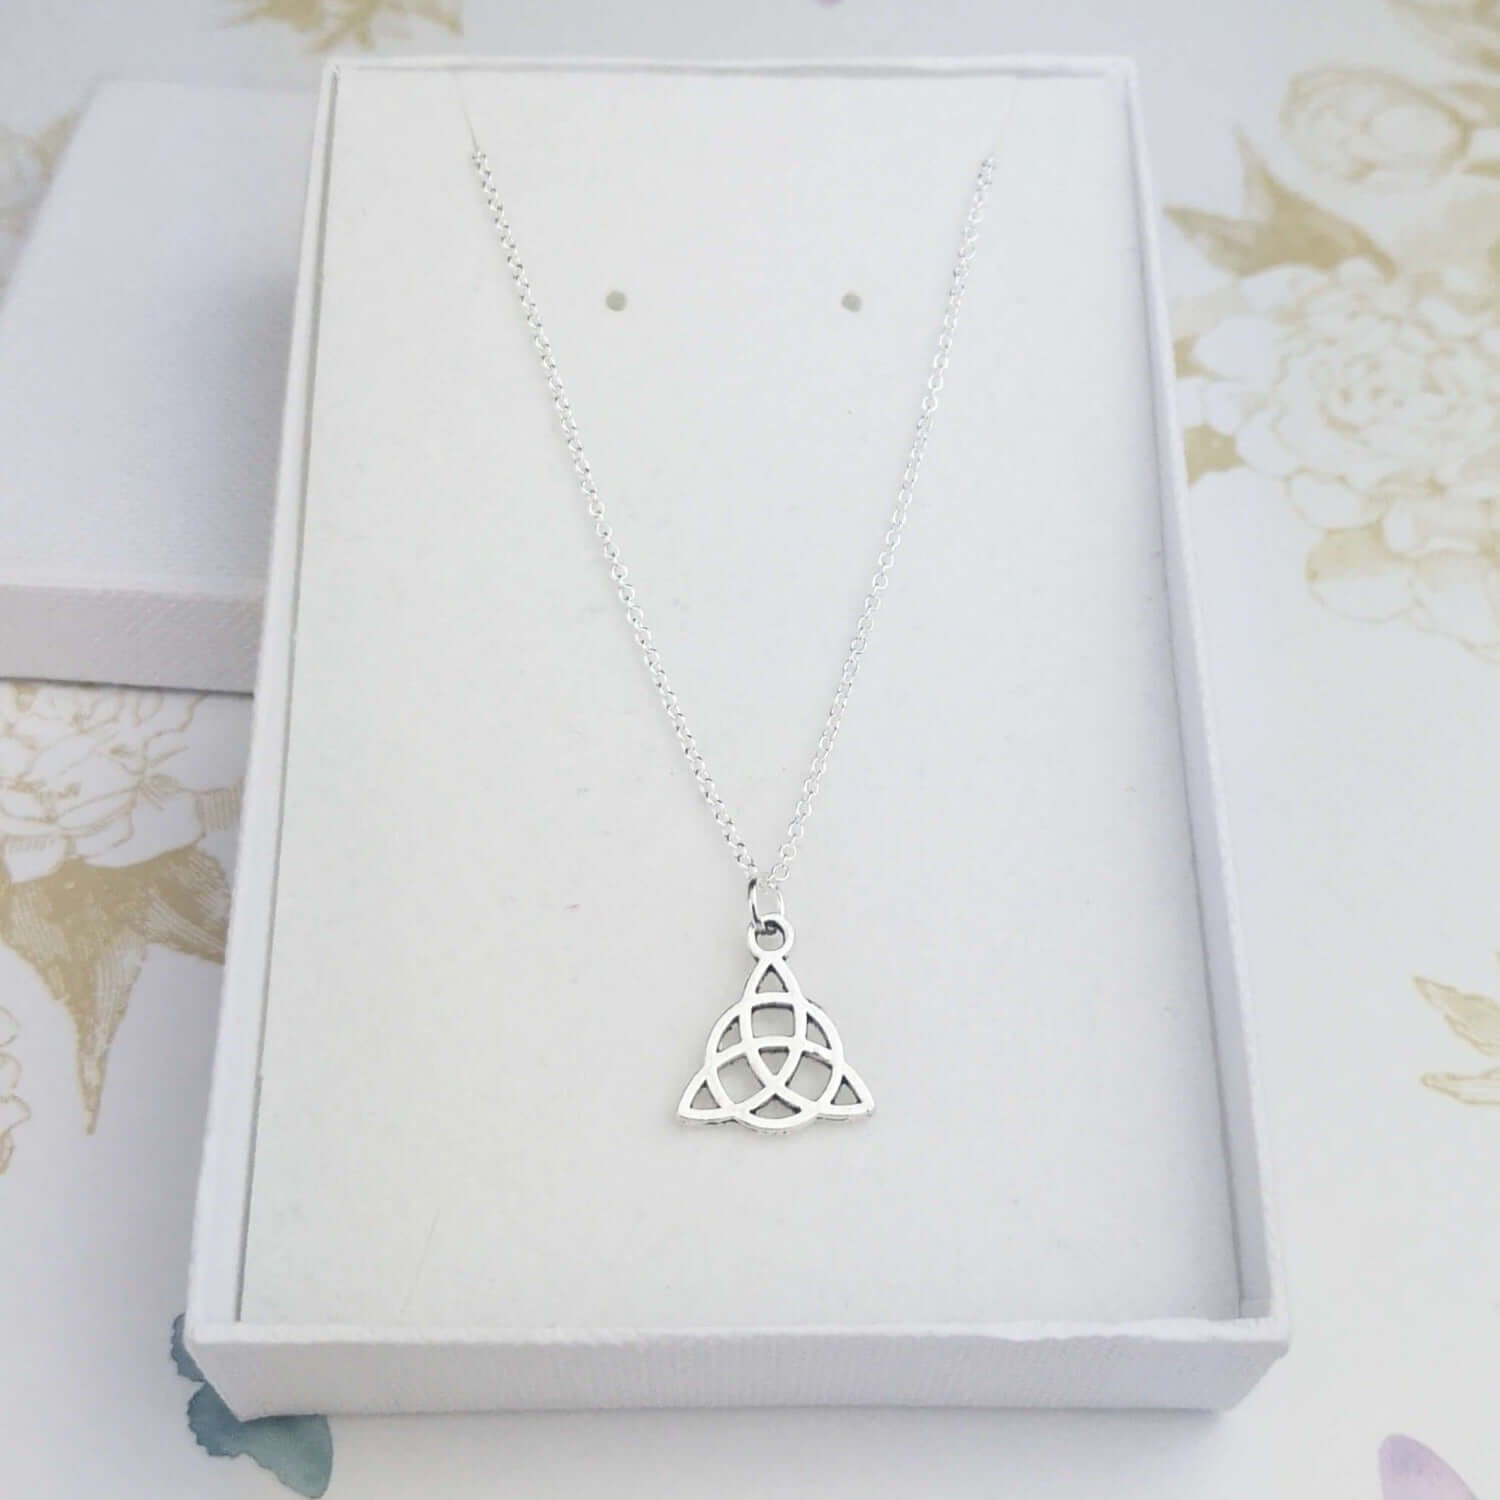 Celtic knot necklace in sterling silver